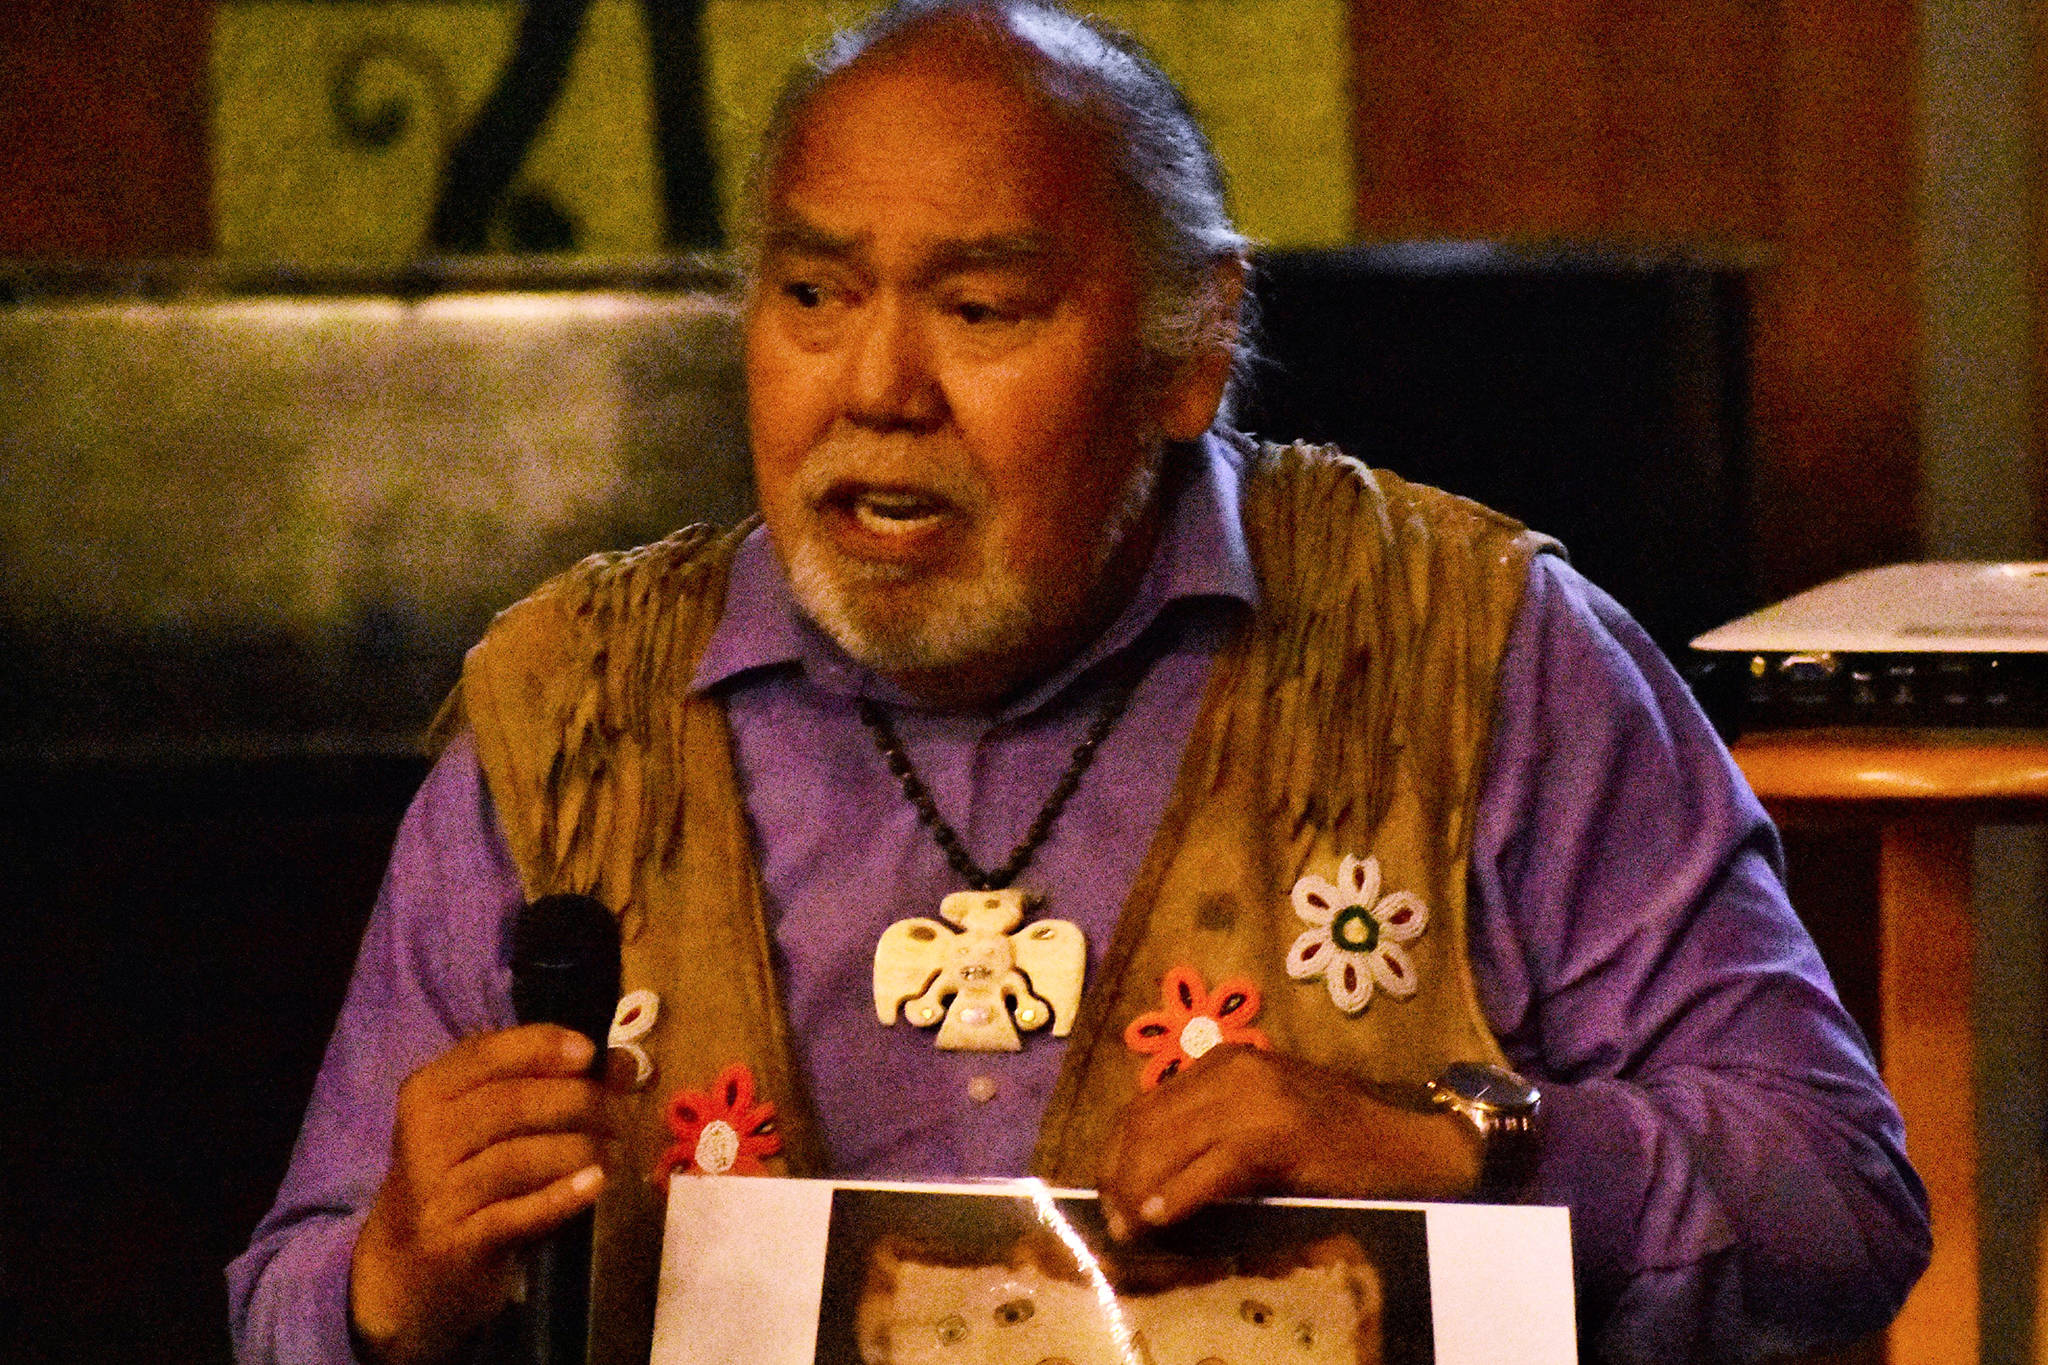 David Katzeek holds up a photo of a sun blanket at Northern Light United Church in Juneau during the “Climate Change Through the Eyes of Alaska Natives” forum on Sept. 12, 2019. (Peter Segall | Juneau Empire)